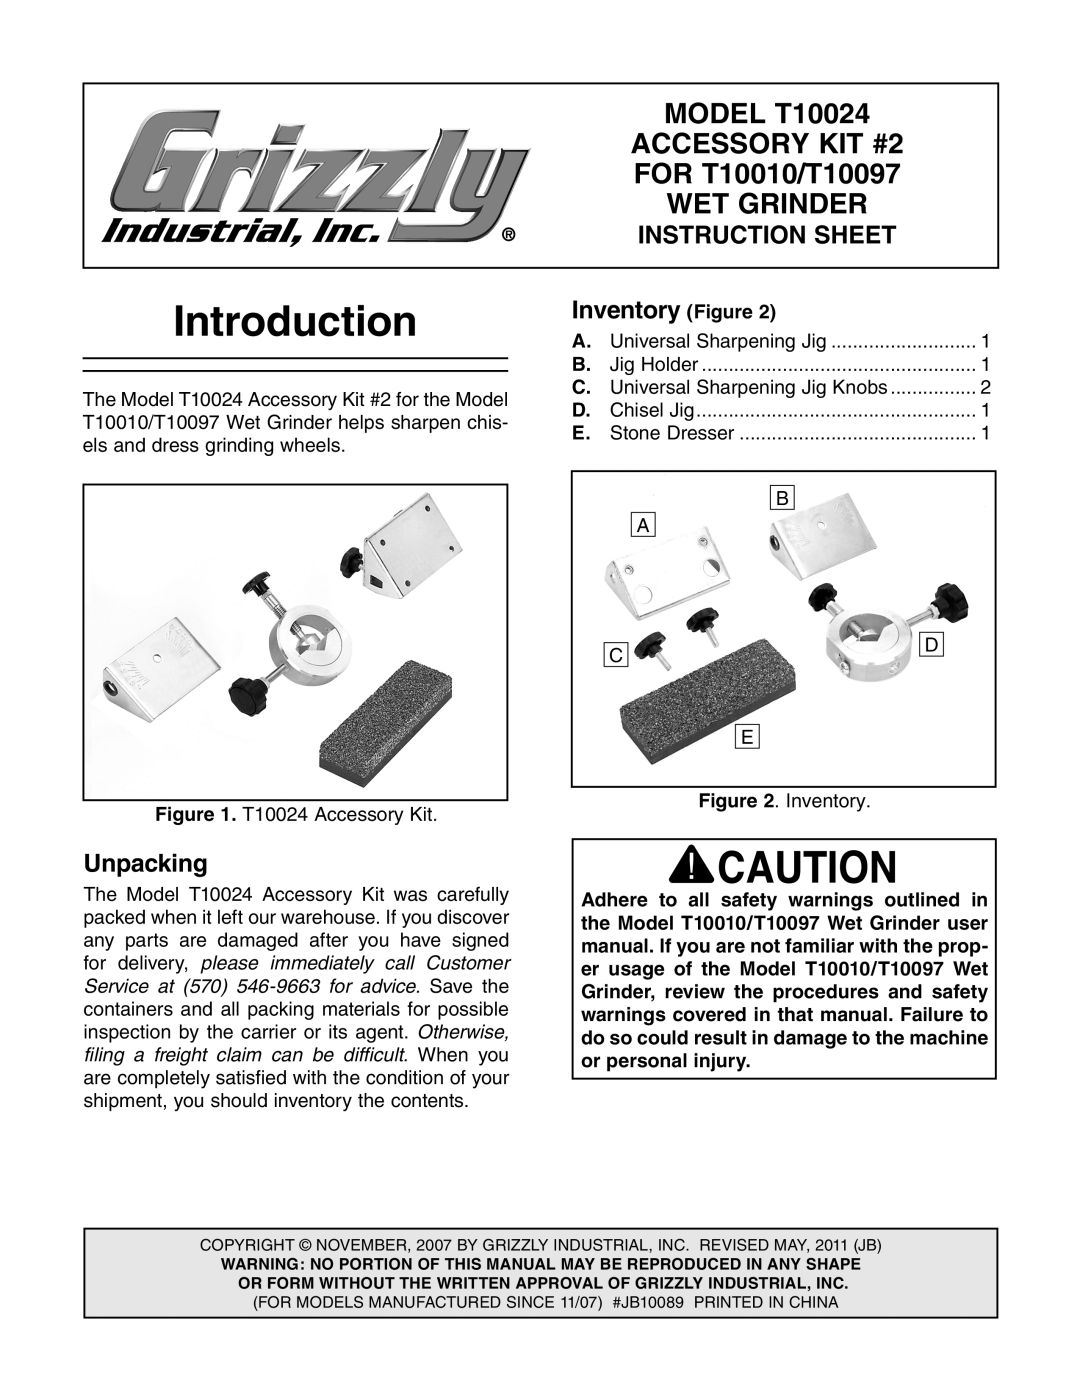 Grizzly instruction sheet Introduction, Inventory Figure, Unpacking, T10024 Accessory Kit, MODEL T10024, Wet Grinder 